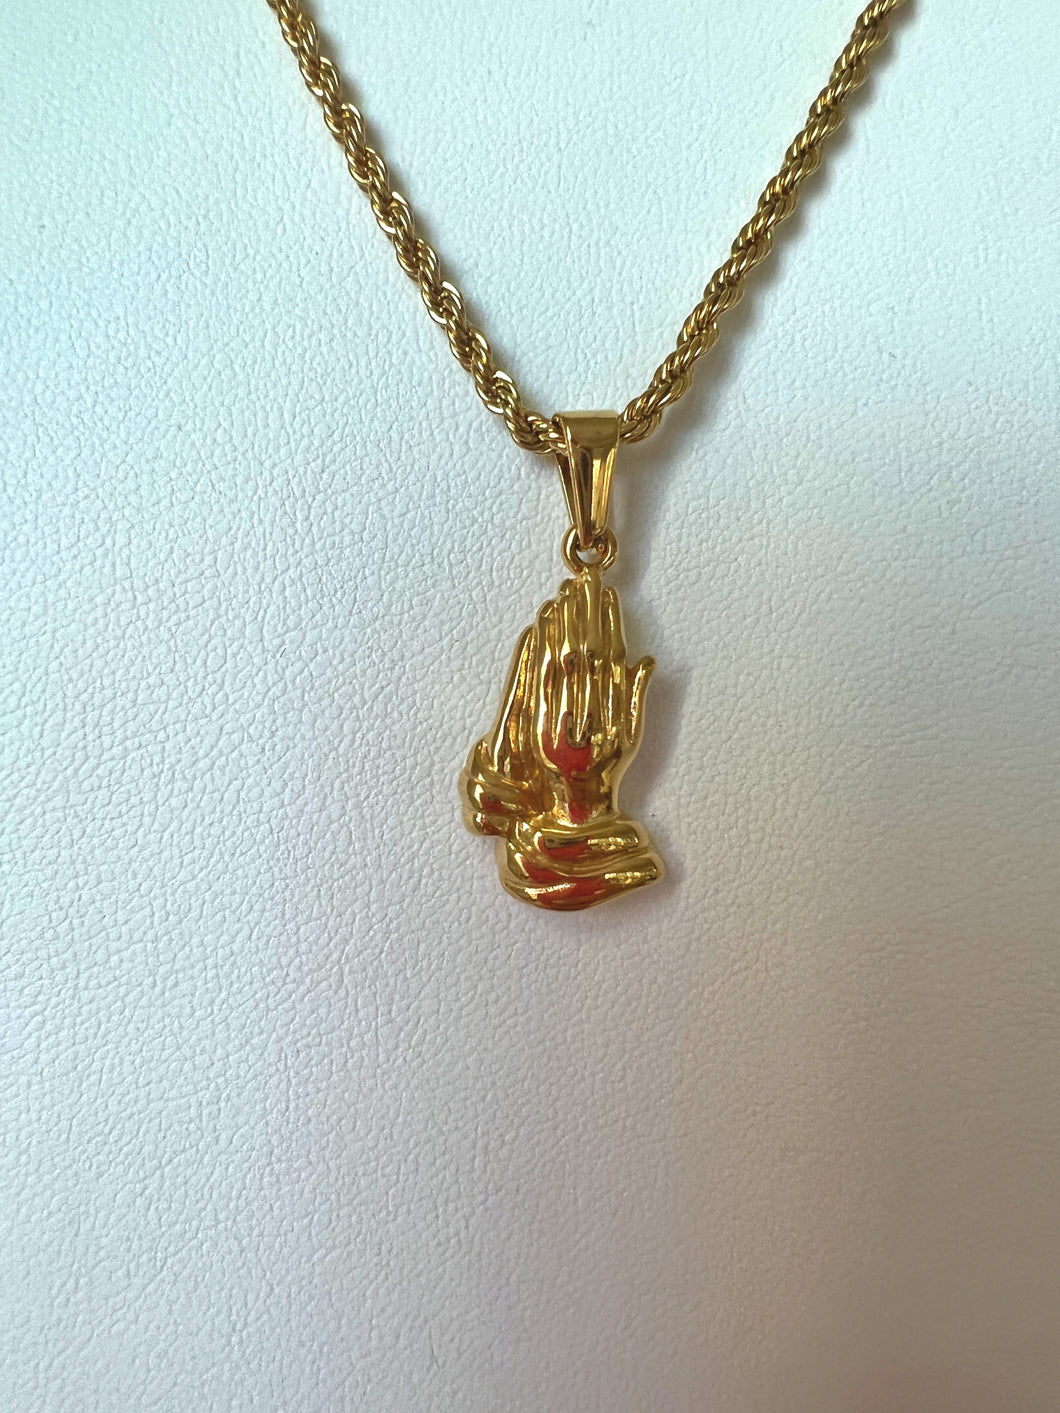 Praying Hands Protection Necklace